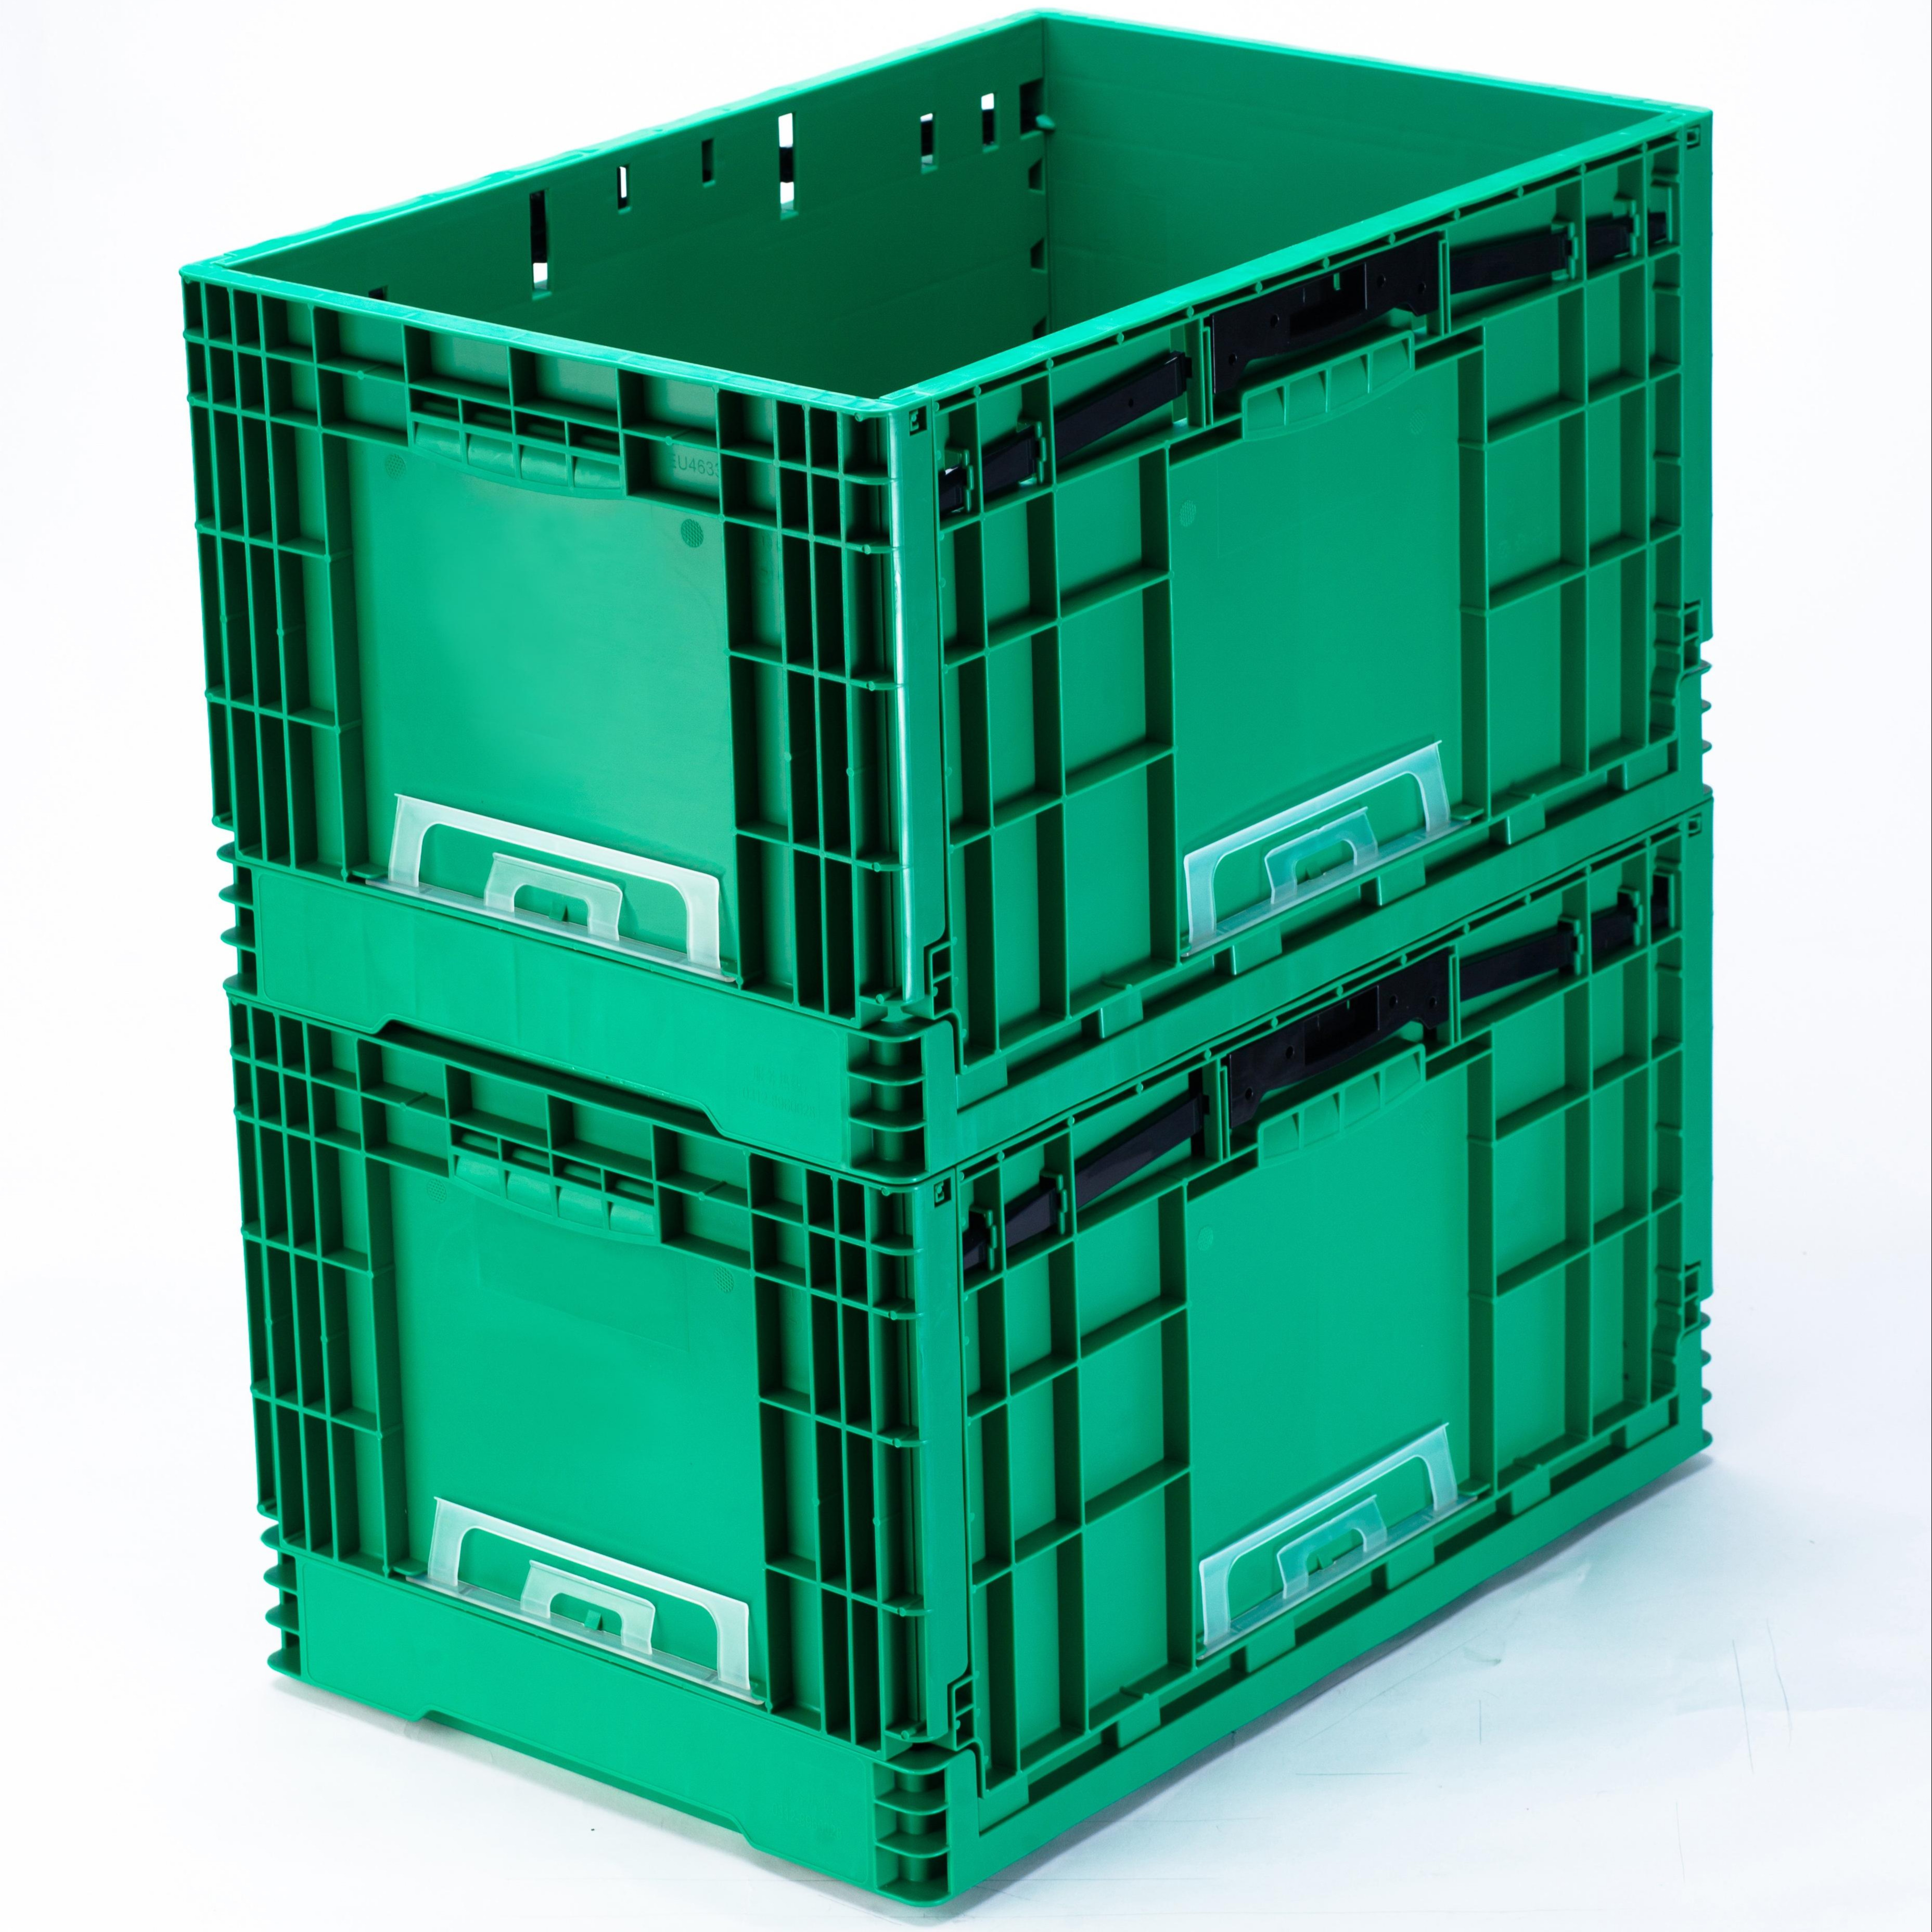 China Heavy Duty Warehouse Storage Bins for Agricultural Industry or Container Management factory